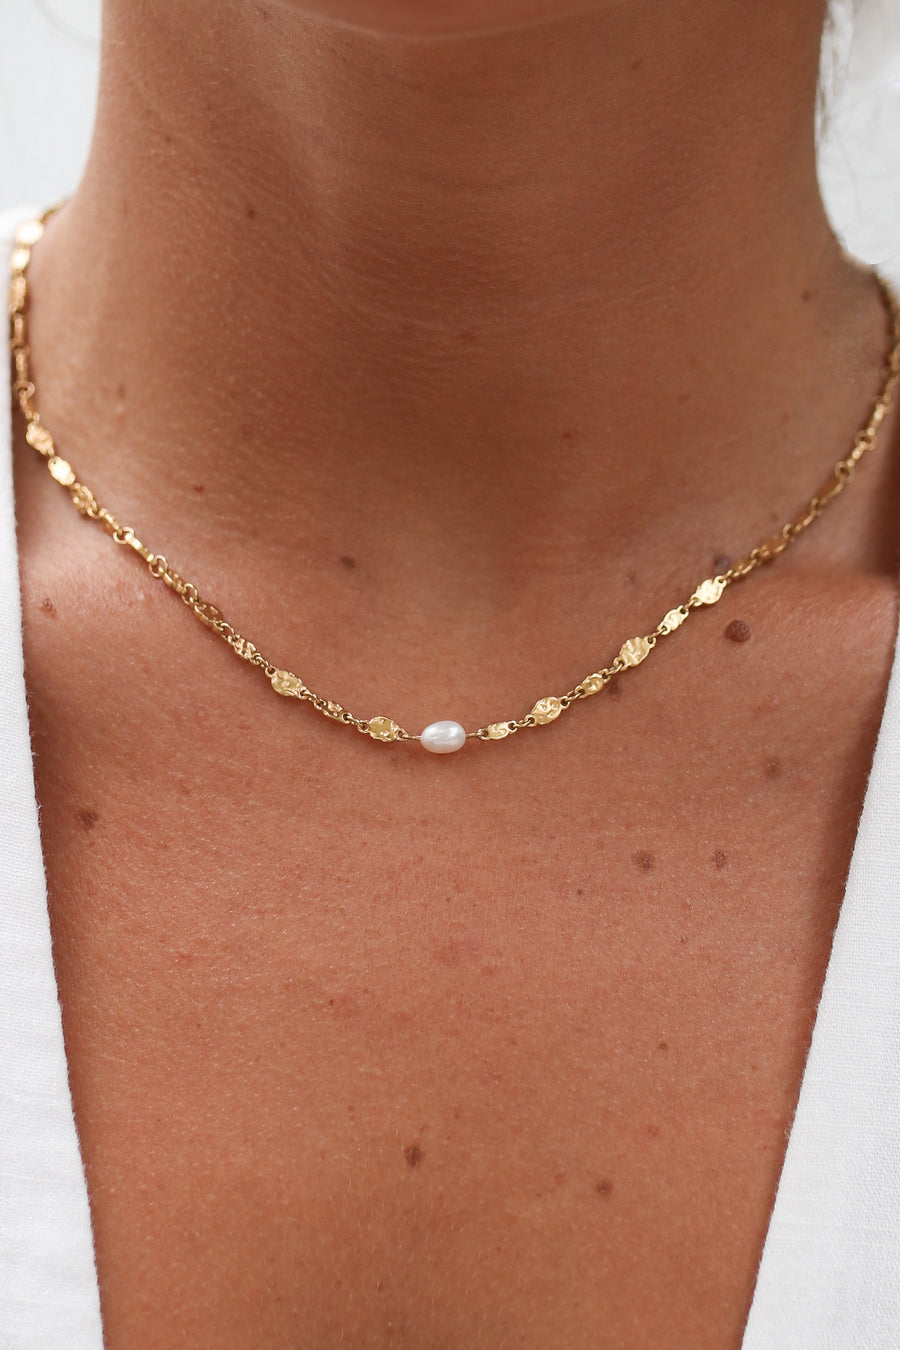 Jasmine - Stainless Steel Gold or Silver Necklace